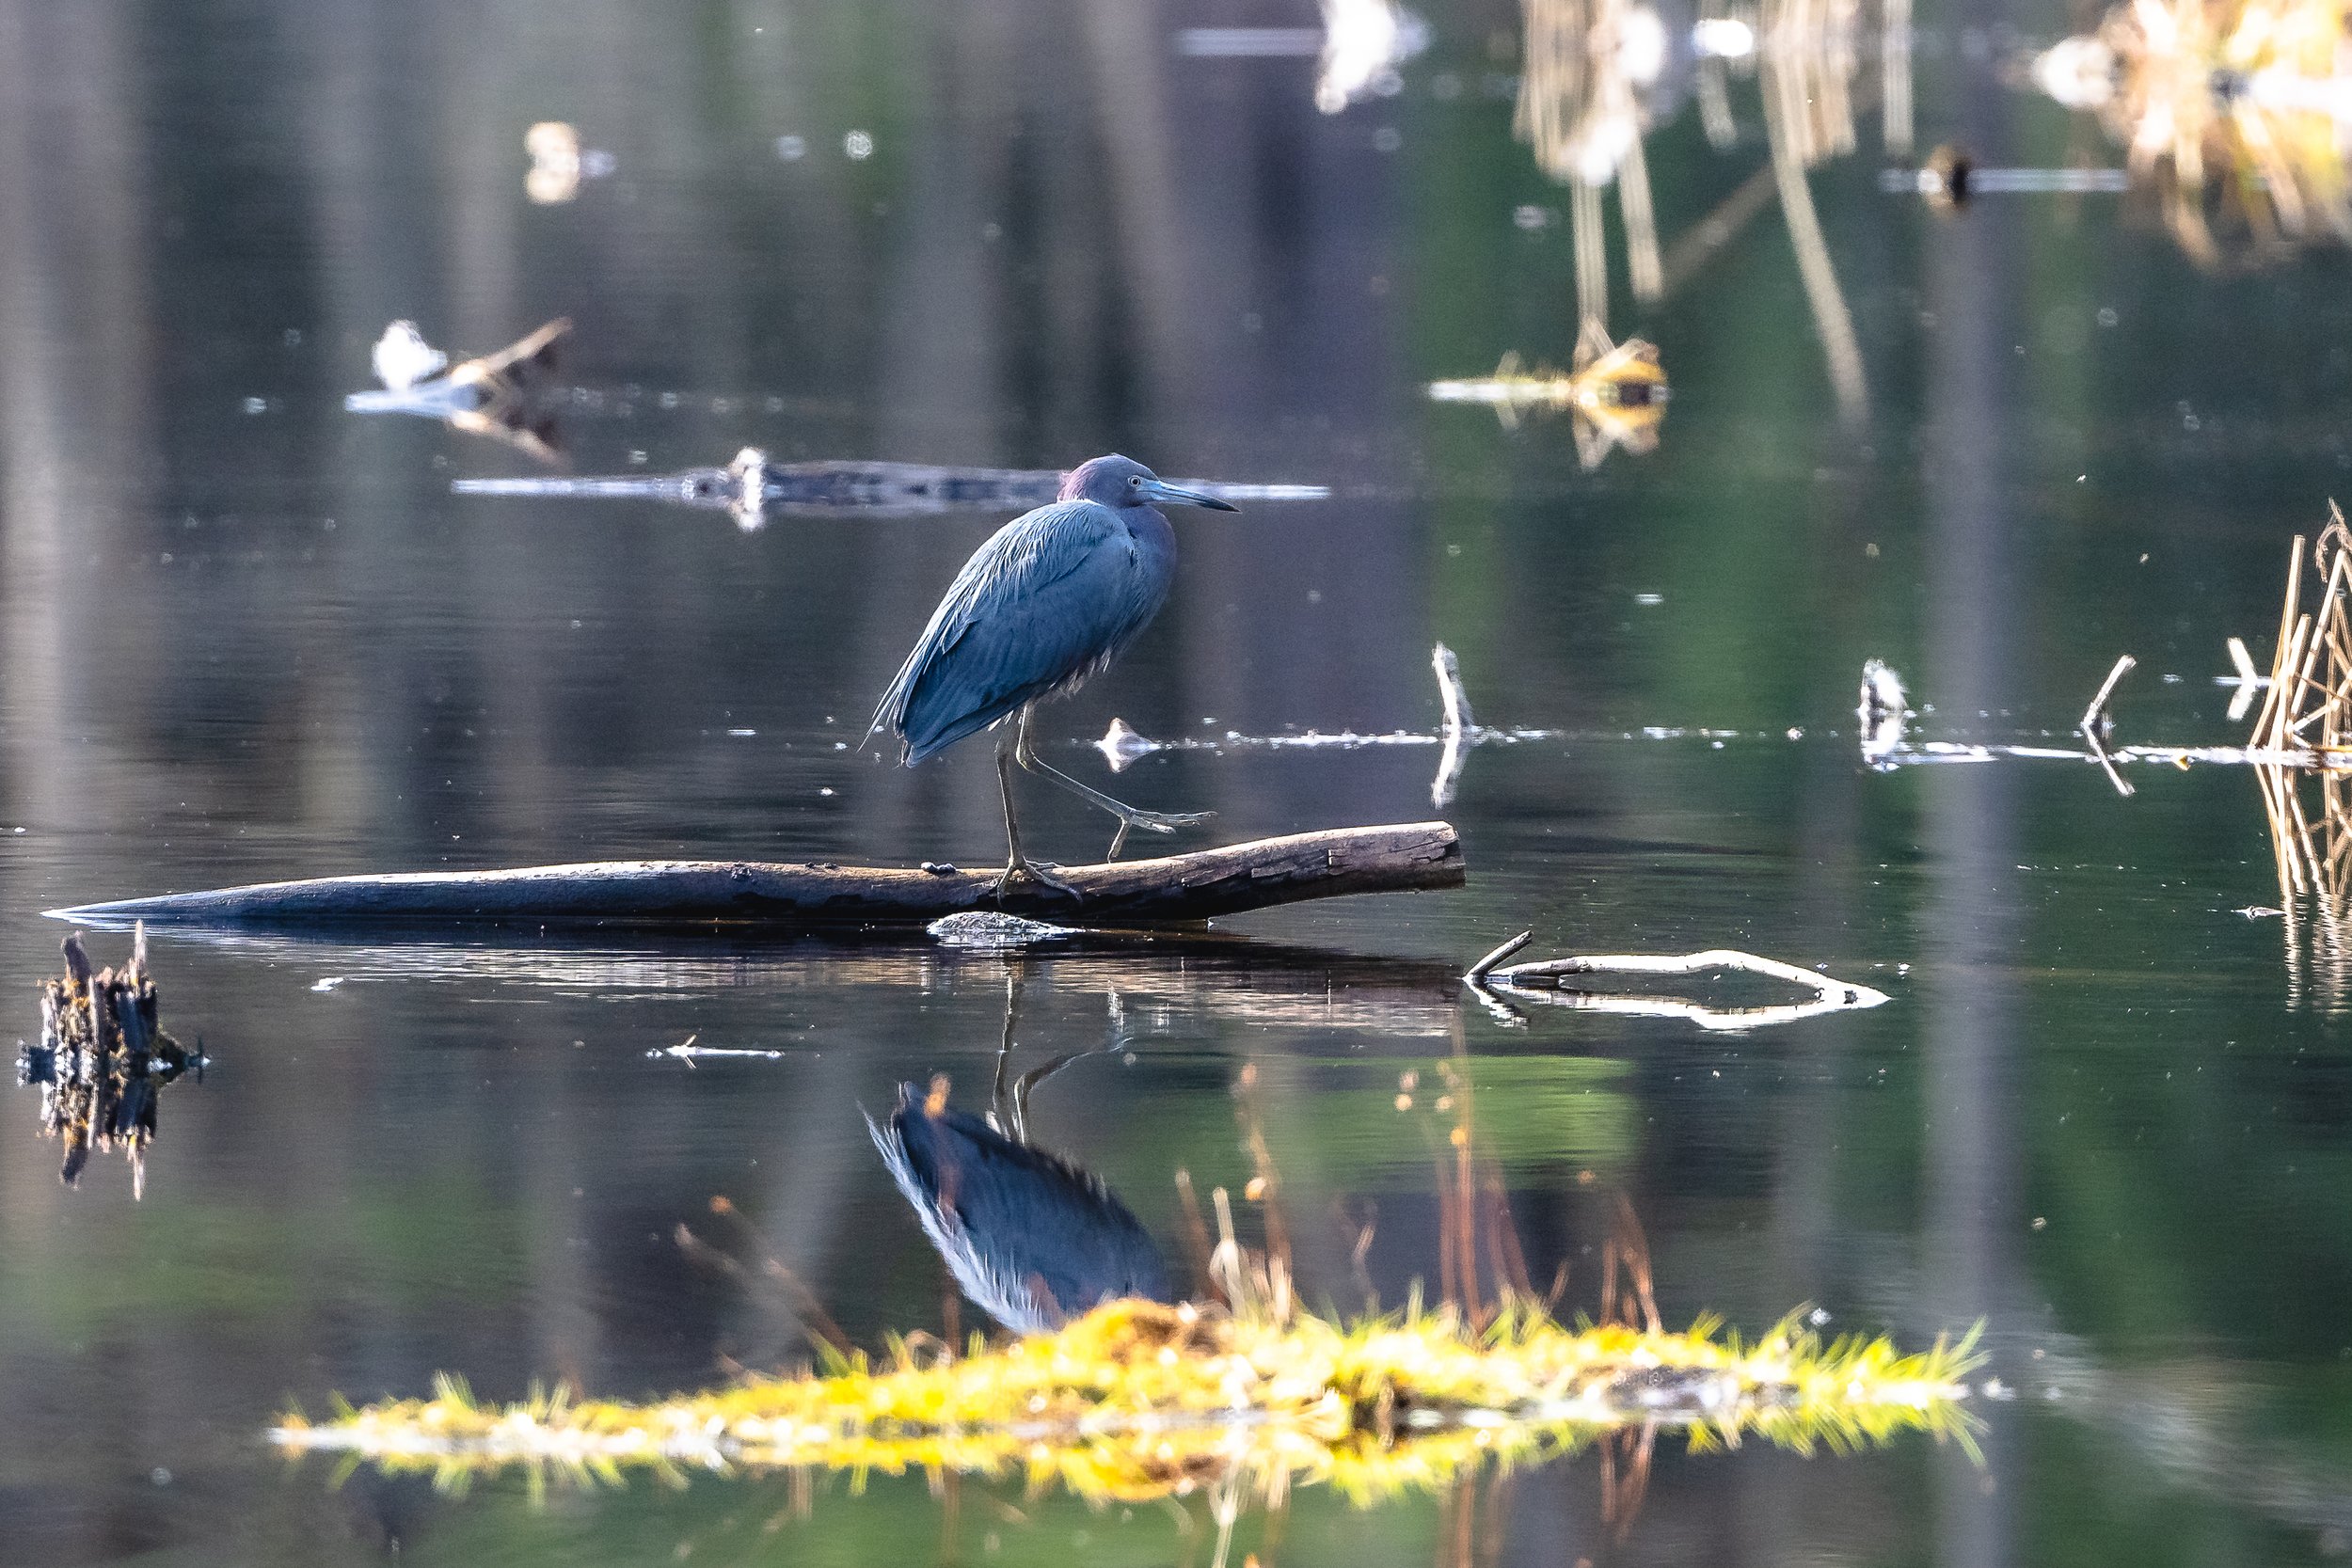   Another view of the Northfield MA little blue heron.  I made  600 images in the 90 minutes I was there!    